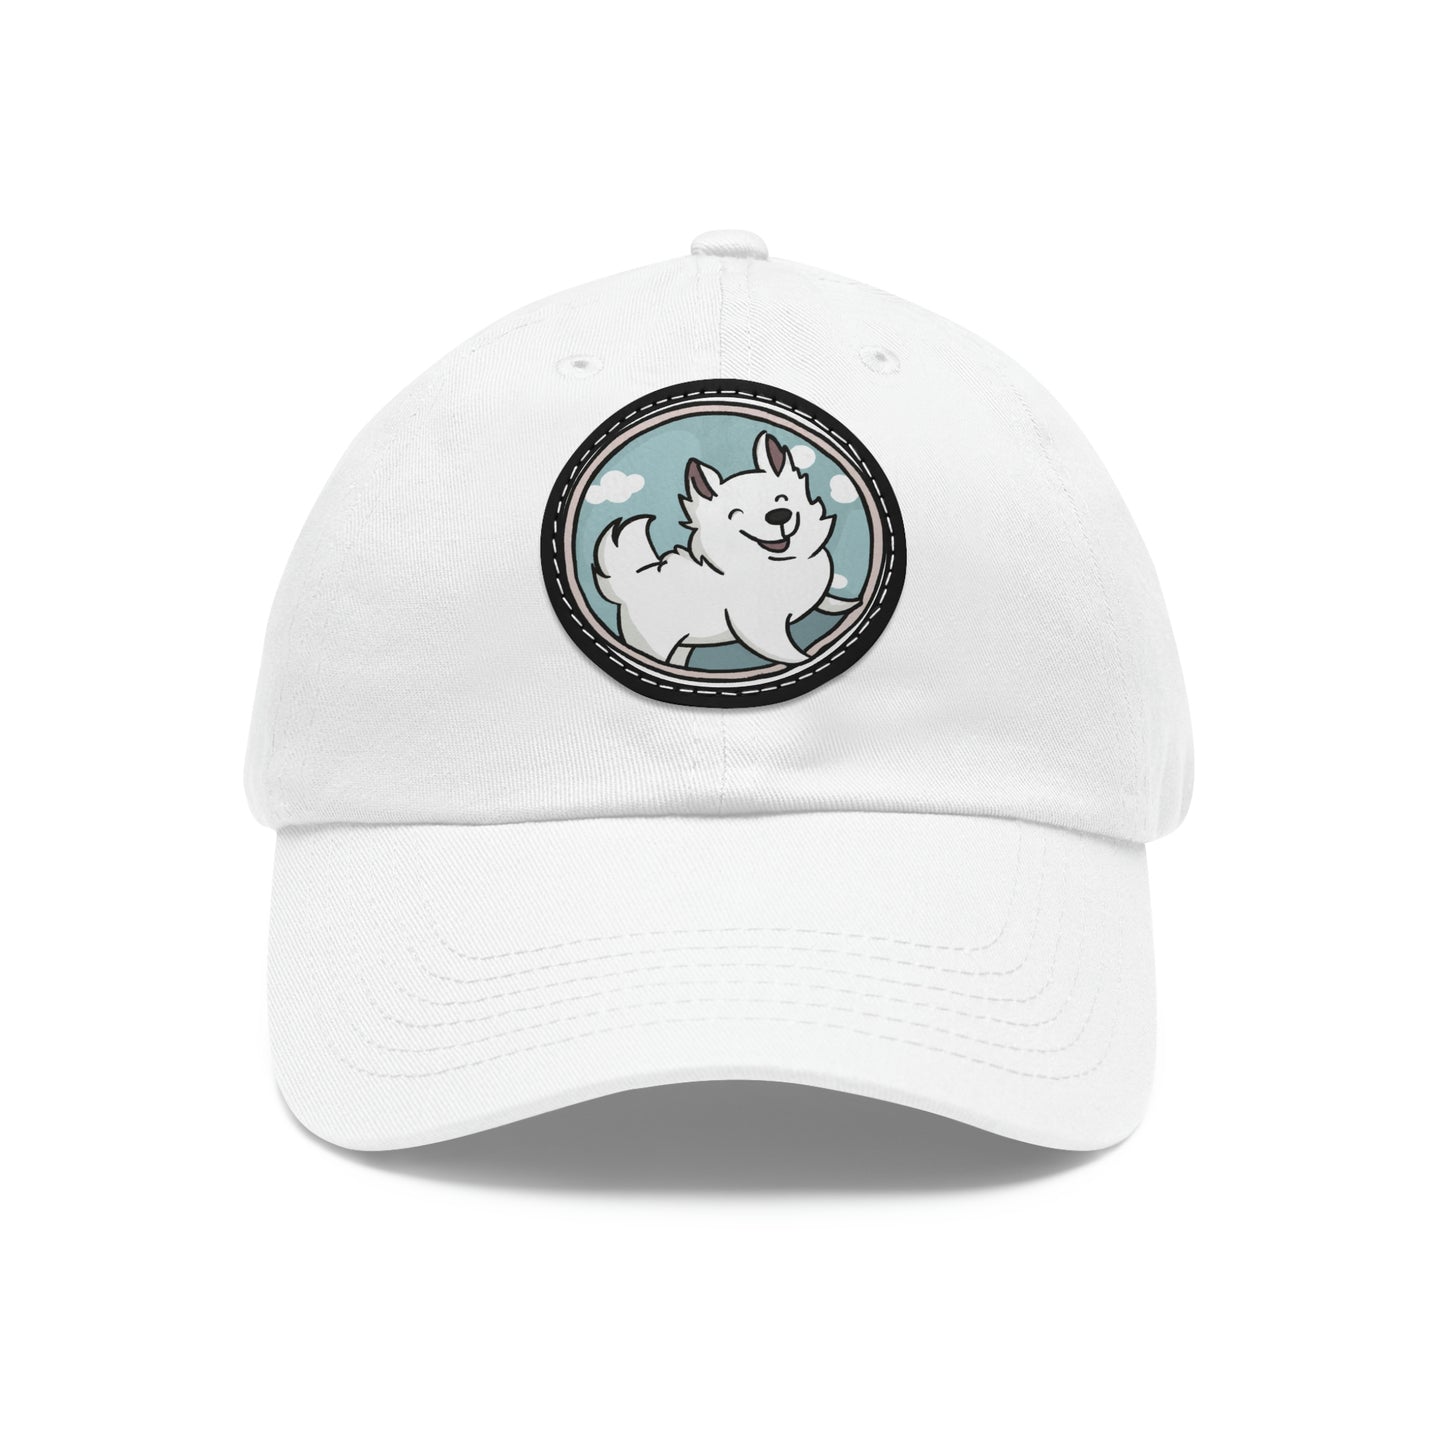 Baseball Cap with Playful Samoyed Pup Leather Patch (Round)